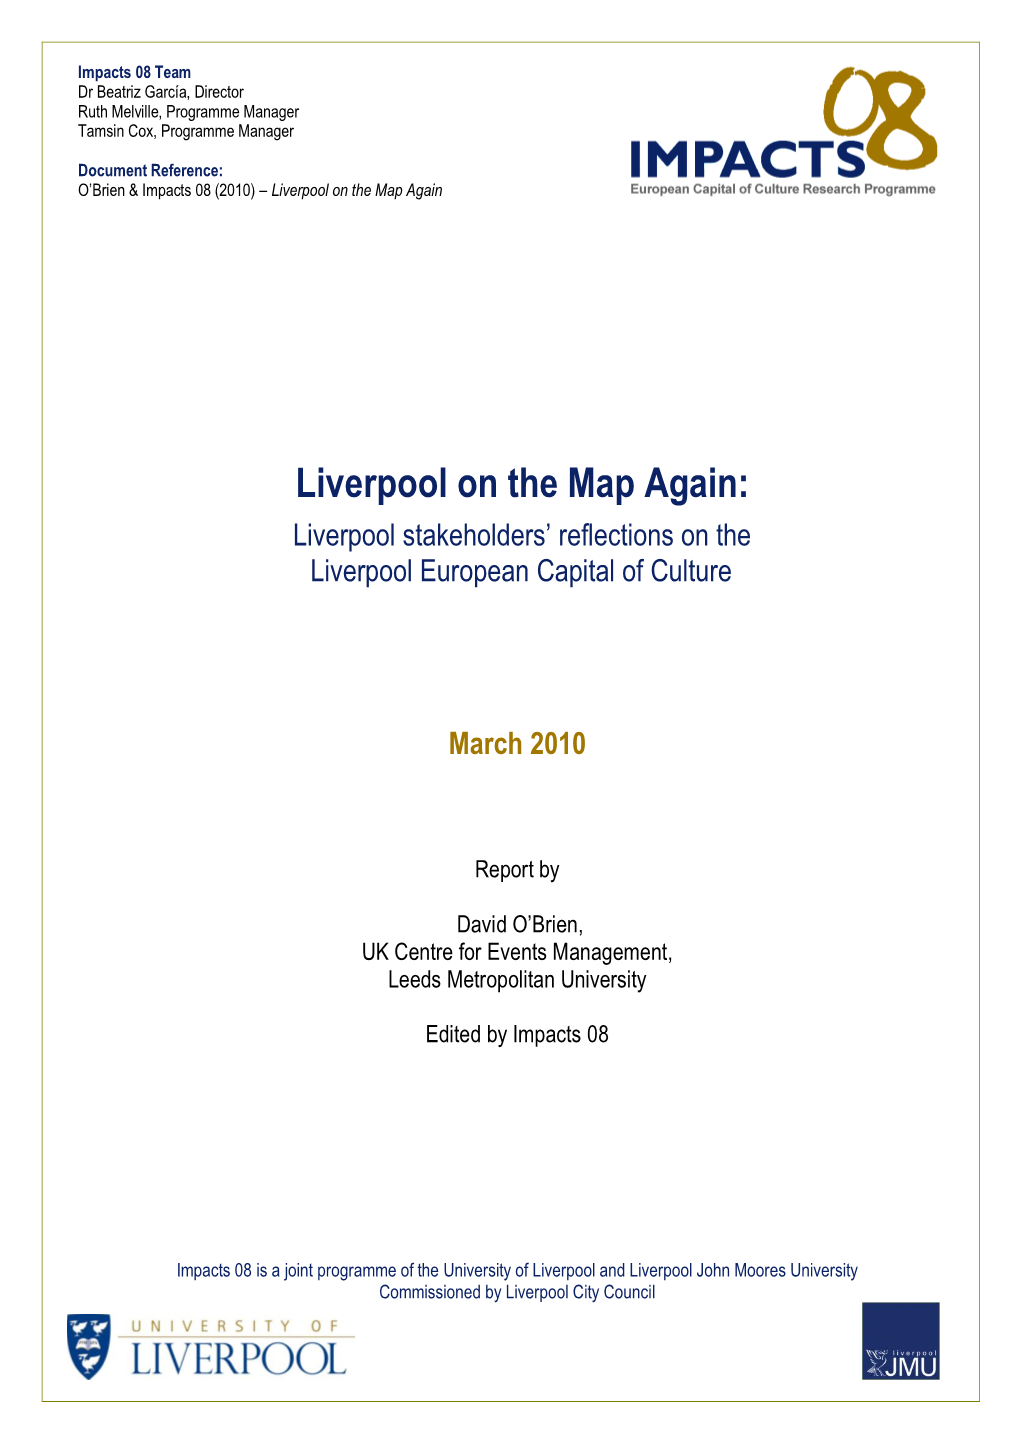 Liverpool on the Map Again: Liverpool Stakeholders' Reflections on The